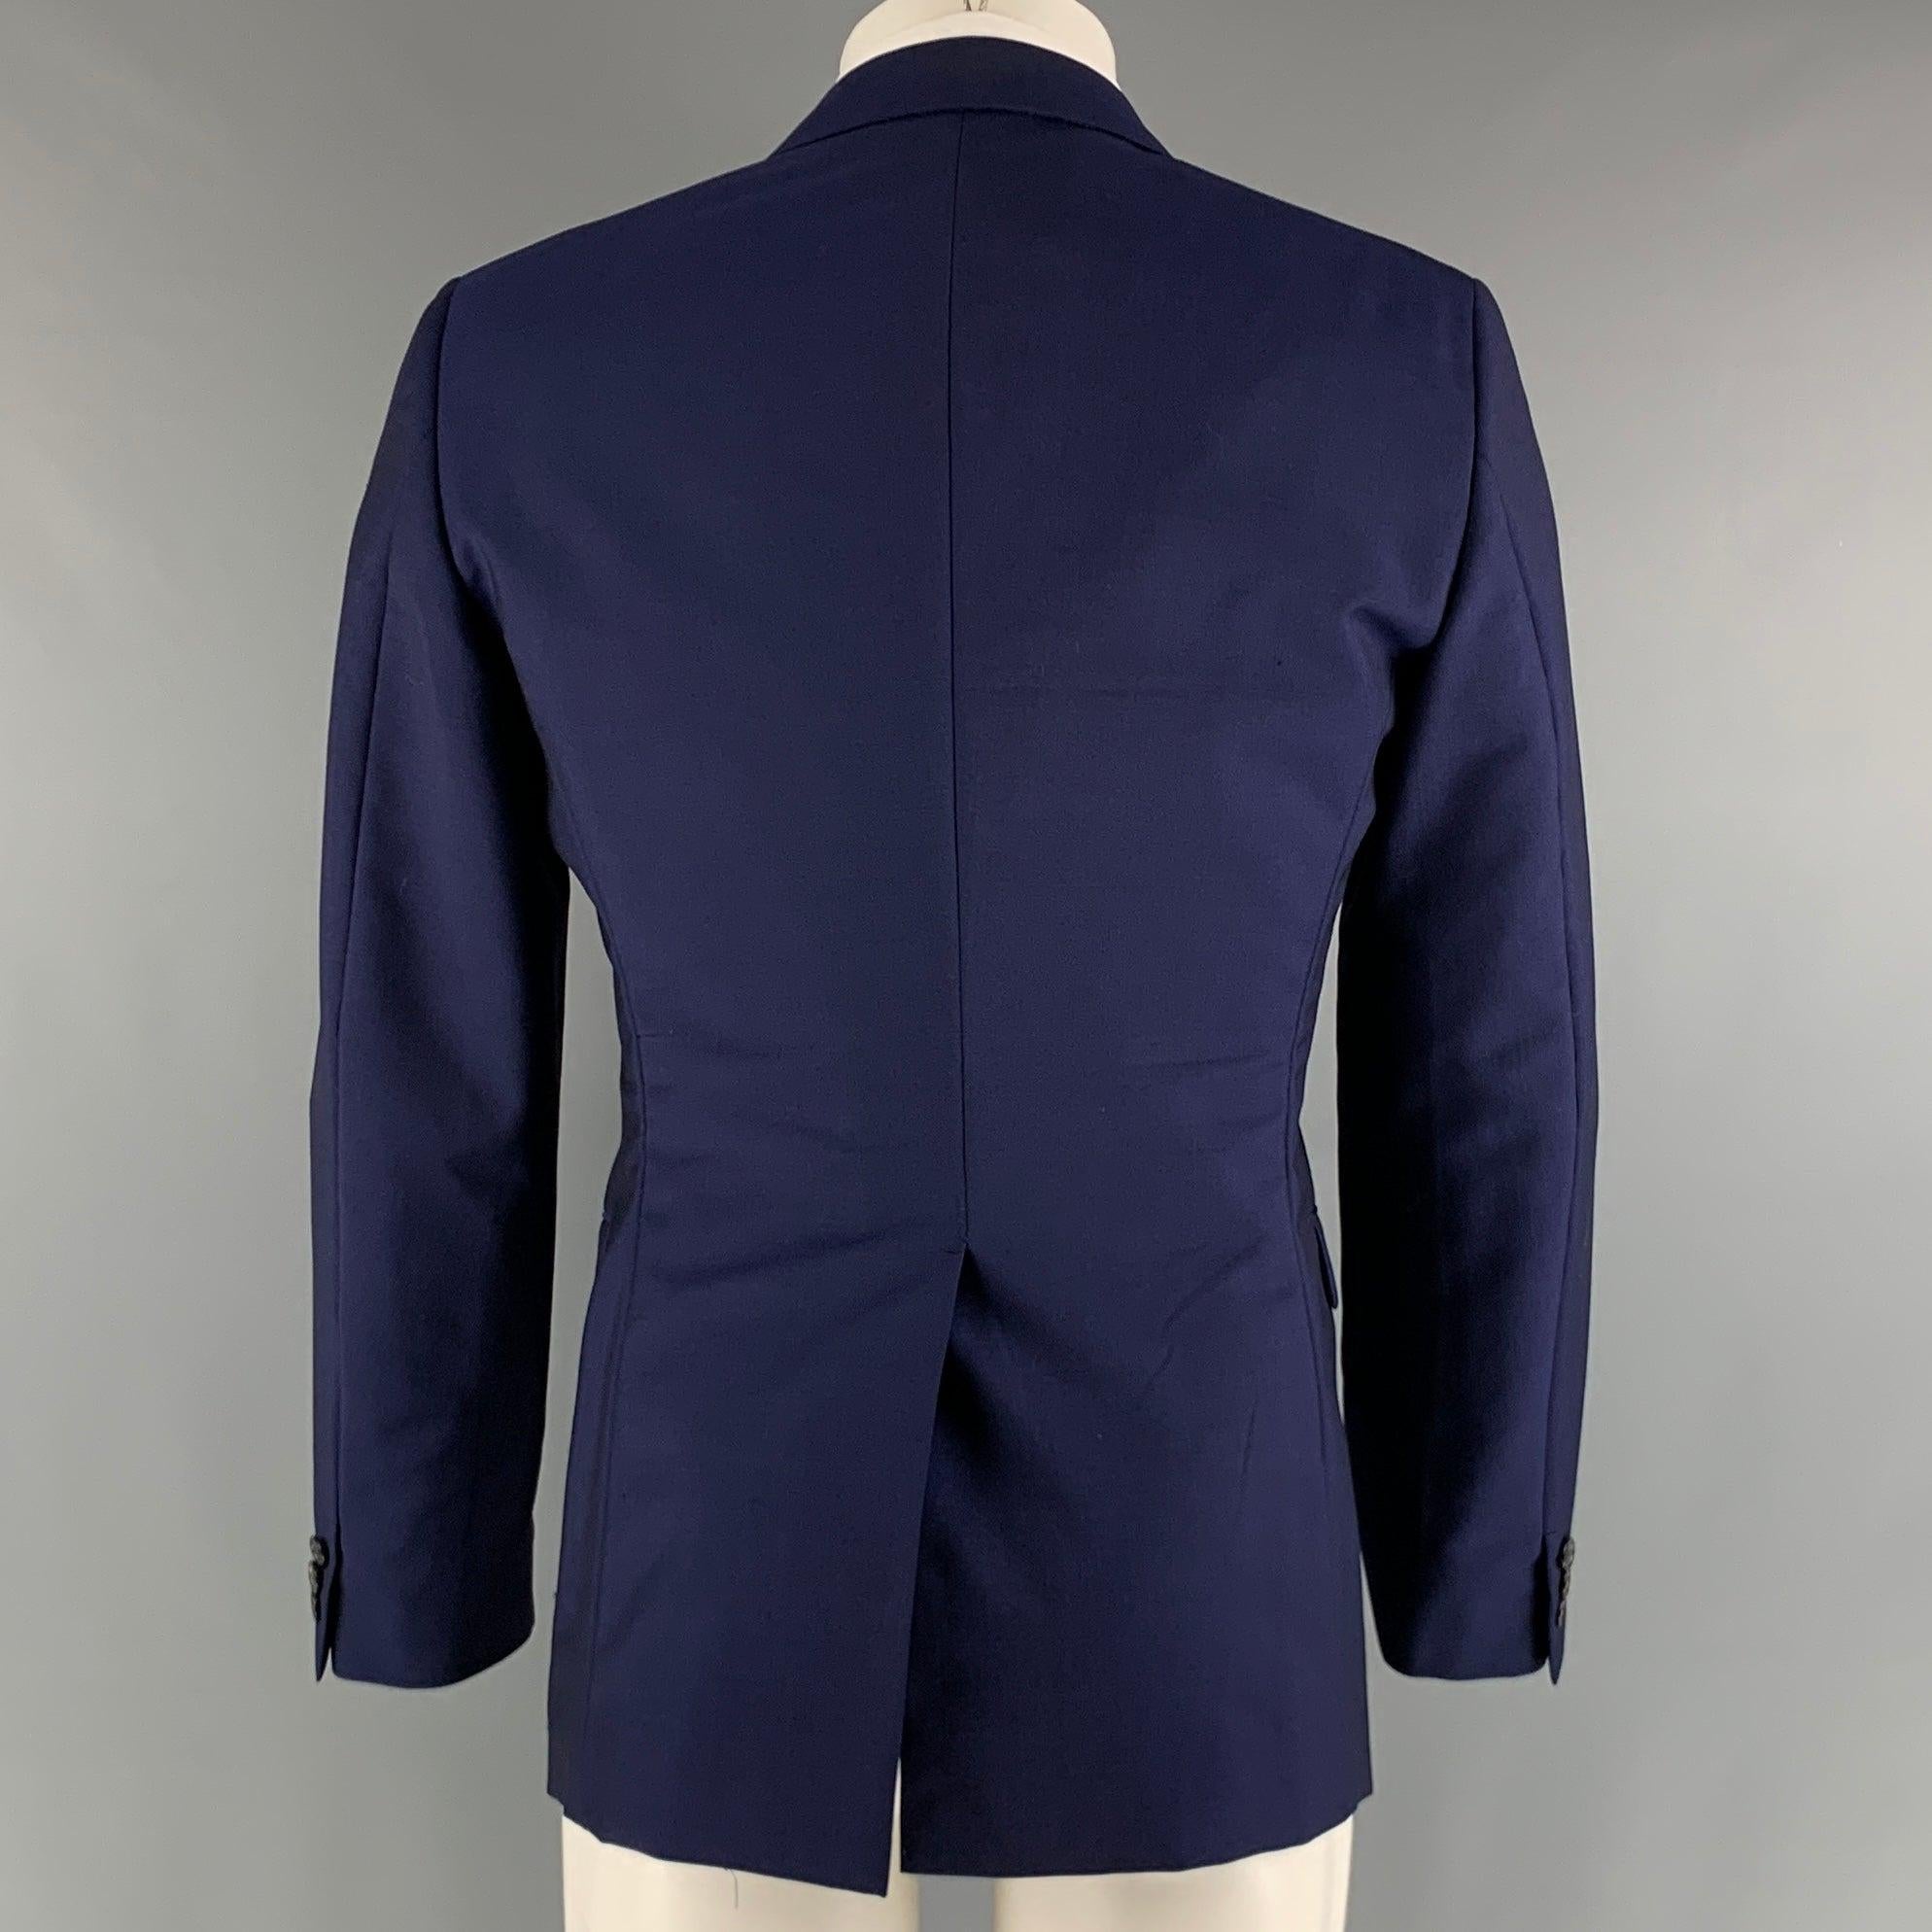 JIL SANDER Size 38 Royal Blue Solid Wool Mohair Notch Lapel Sport Coat In Excellent Condition For Sale In San Francisco, CA